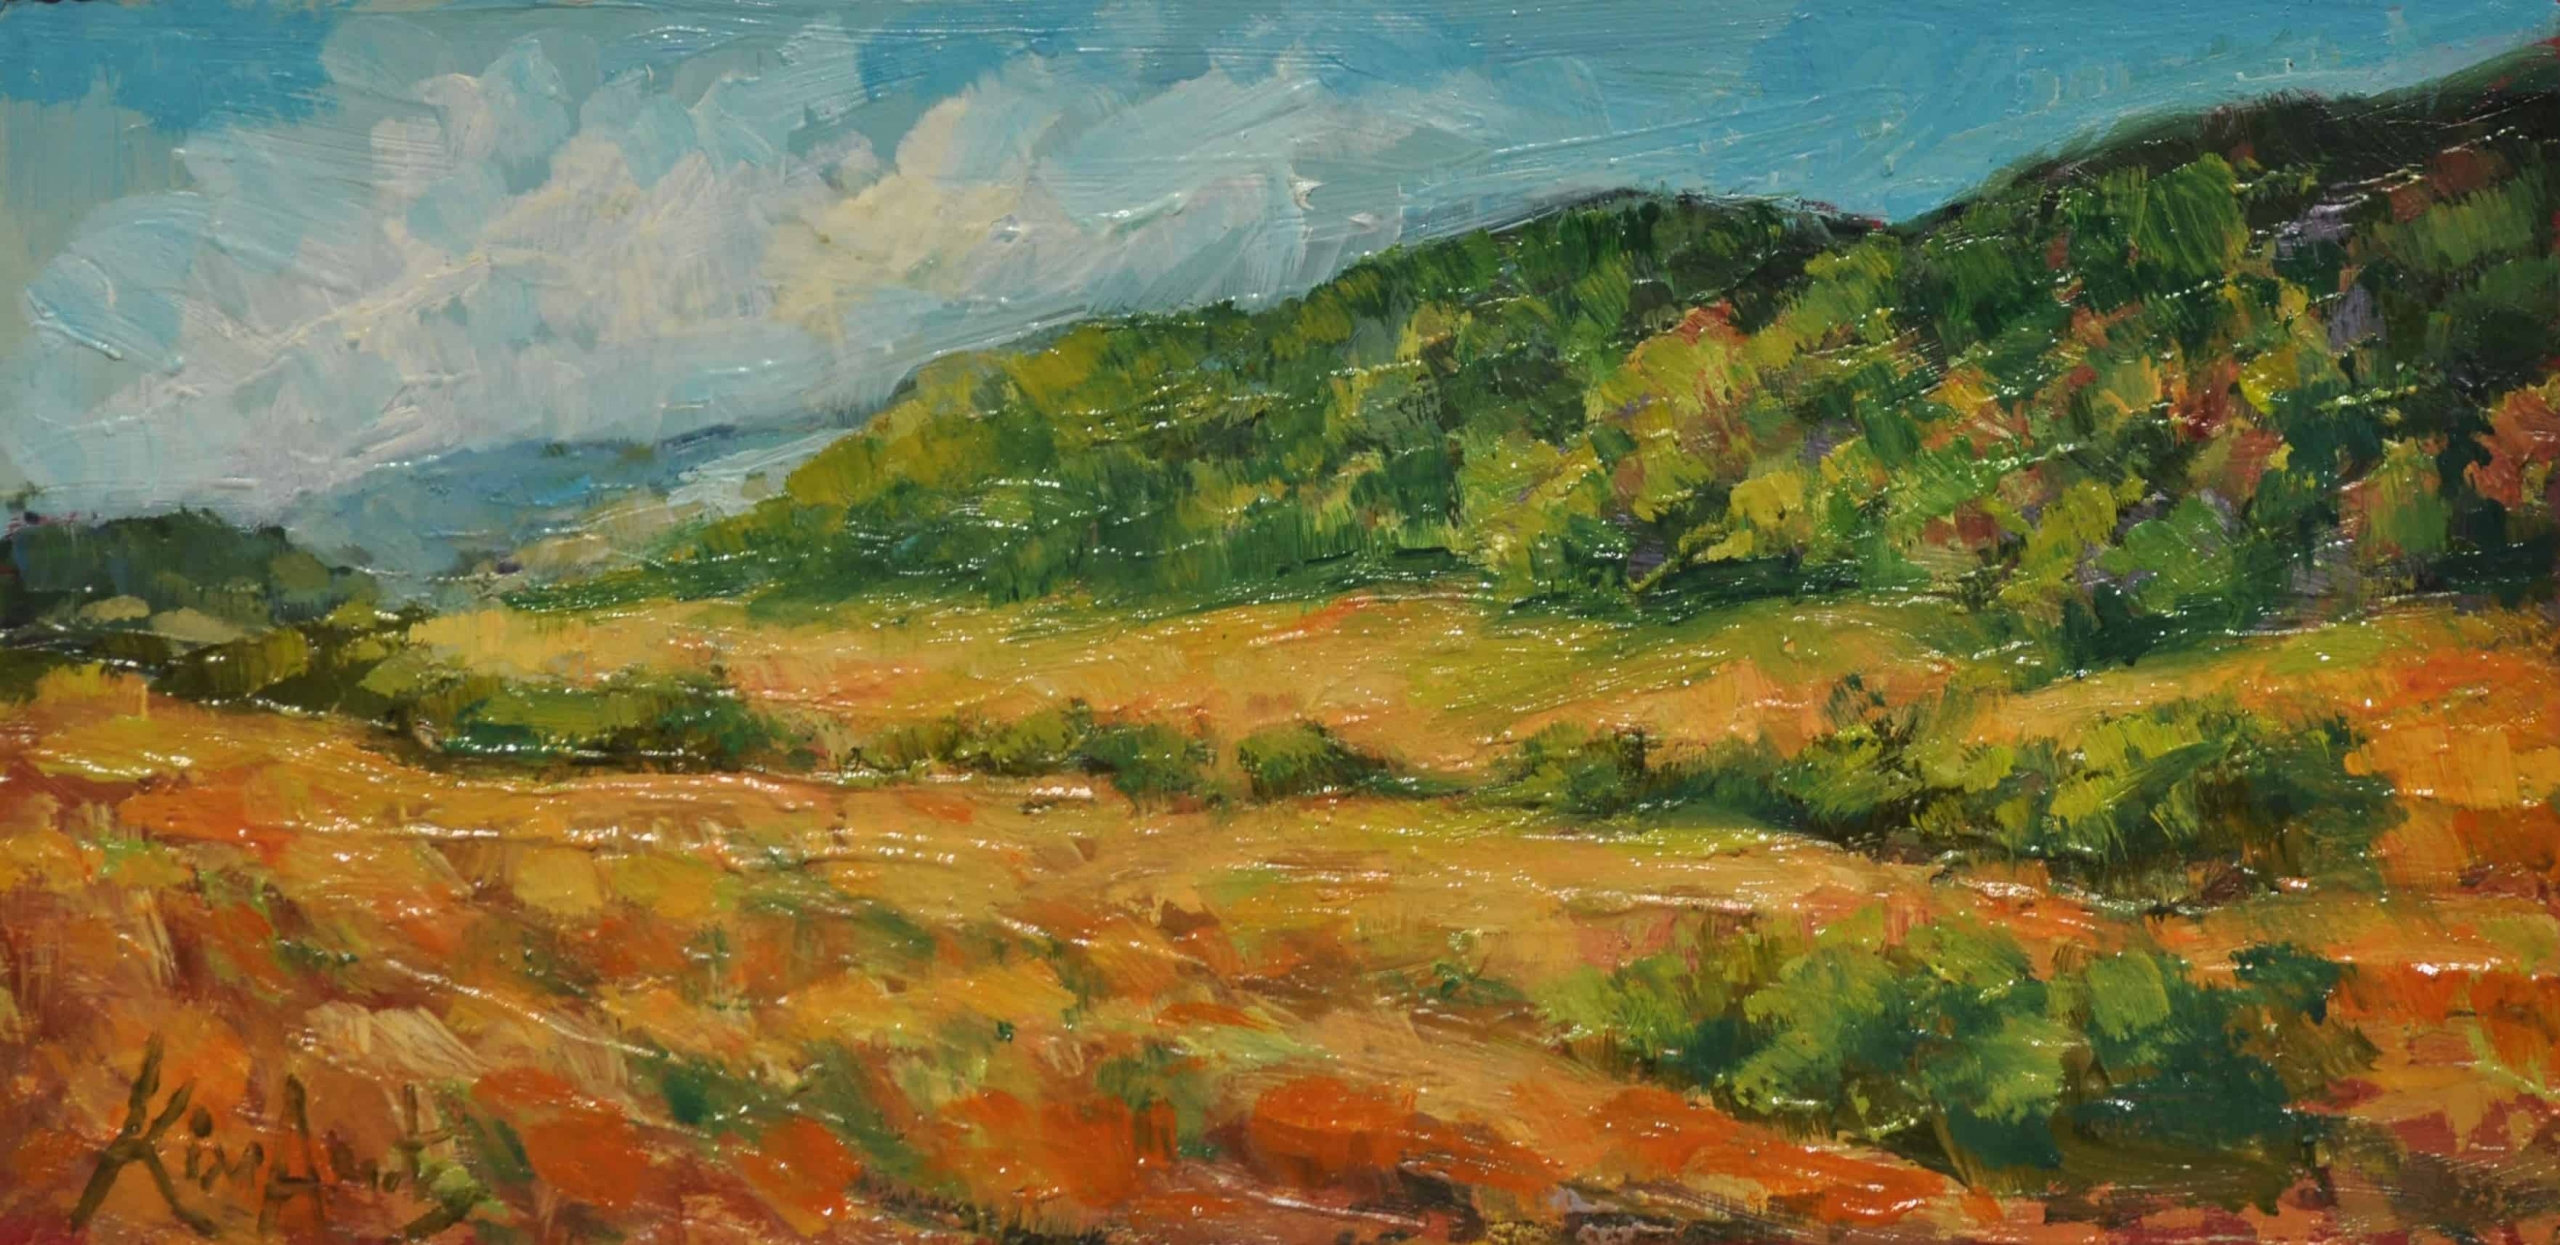 Kim Aerts oil painting - Field and Foothills Near Parrsboro - 3x6 inches